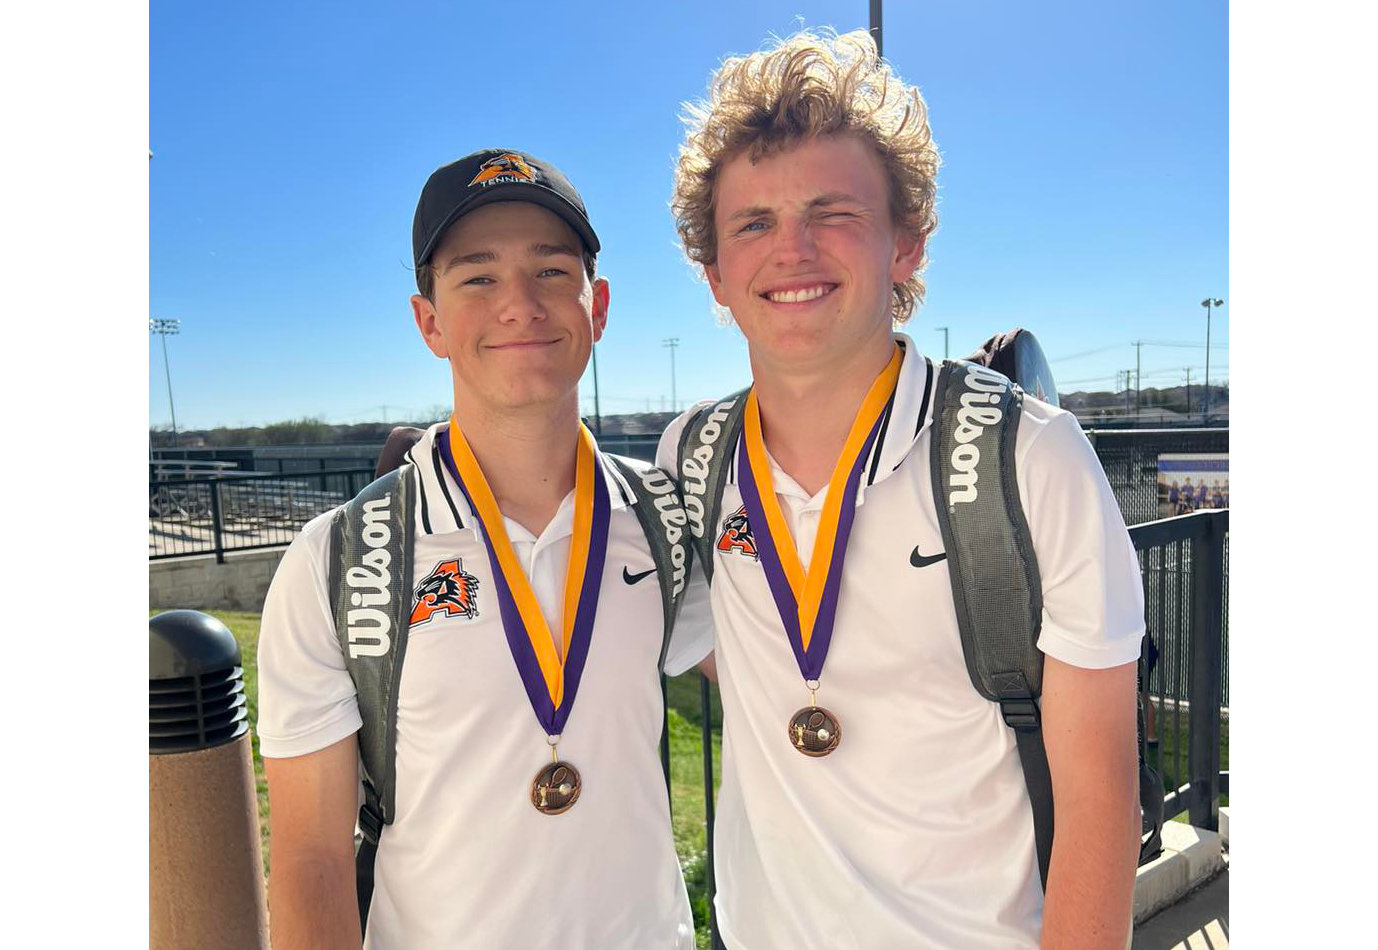 Craig Mason and Hogan Posey placed third in Division A boys doubles at the Chisholm Trail tournament.